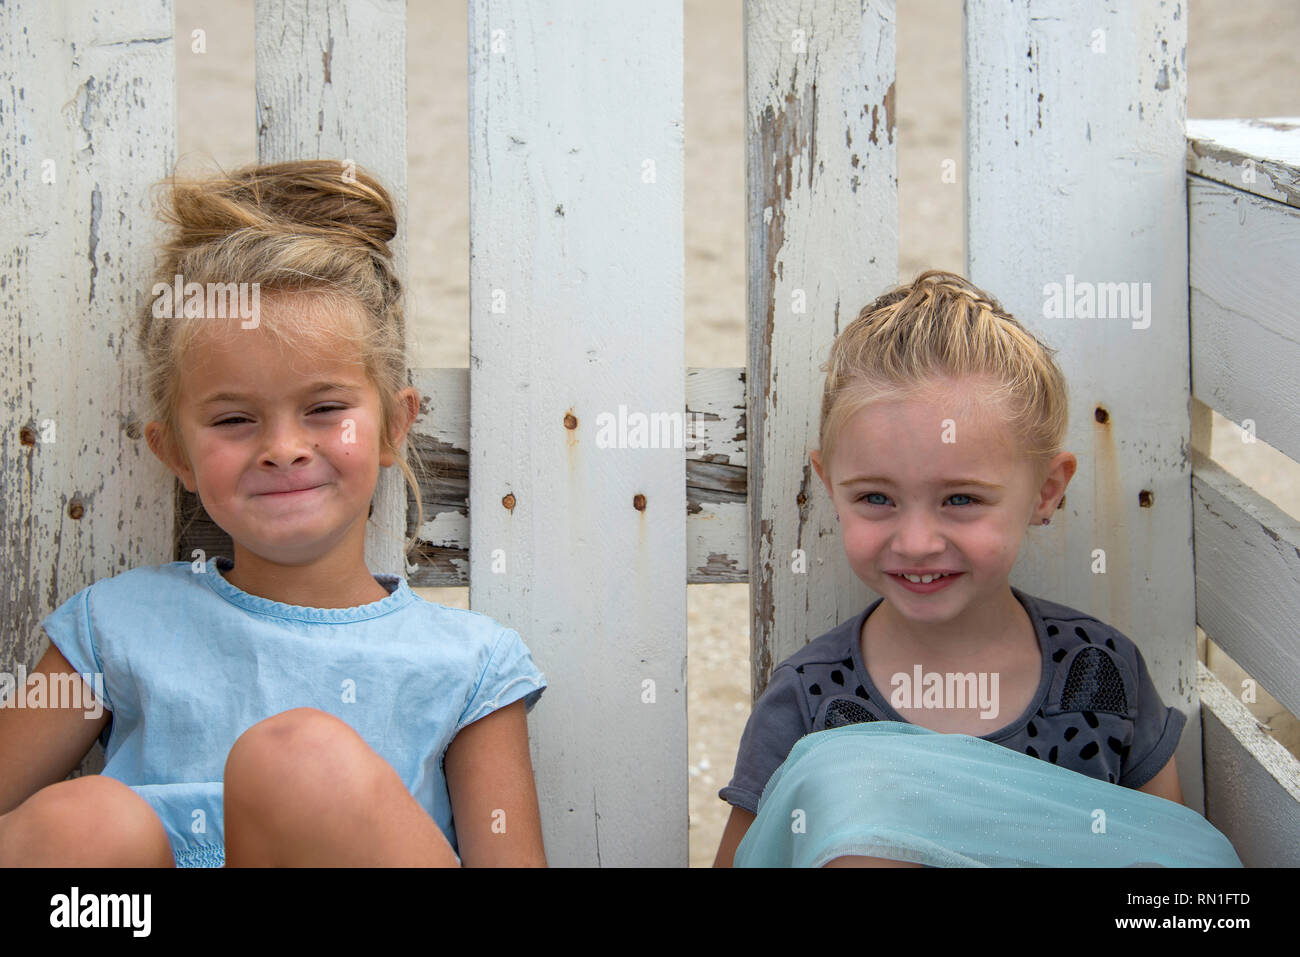 Rockanje,Holland,29-aug-2015:twol lttle girls sitting on a chair maid from pallets and looking and smile to the camera Stock Photo